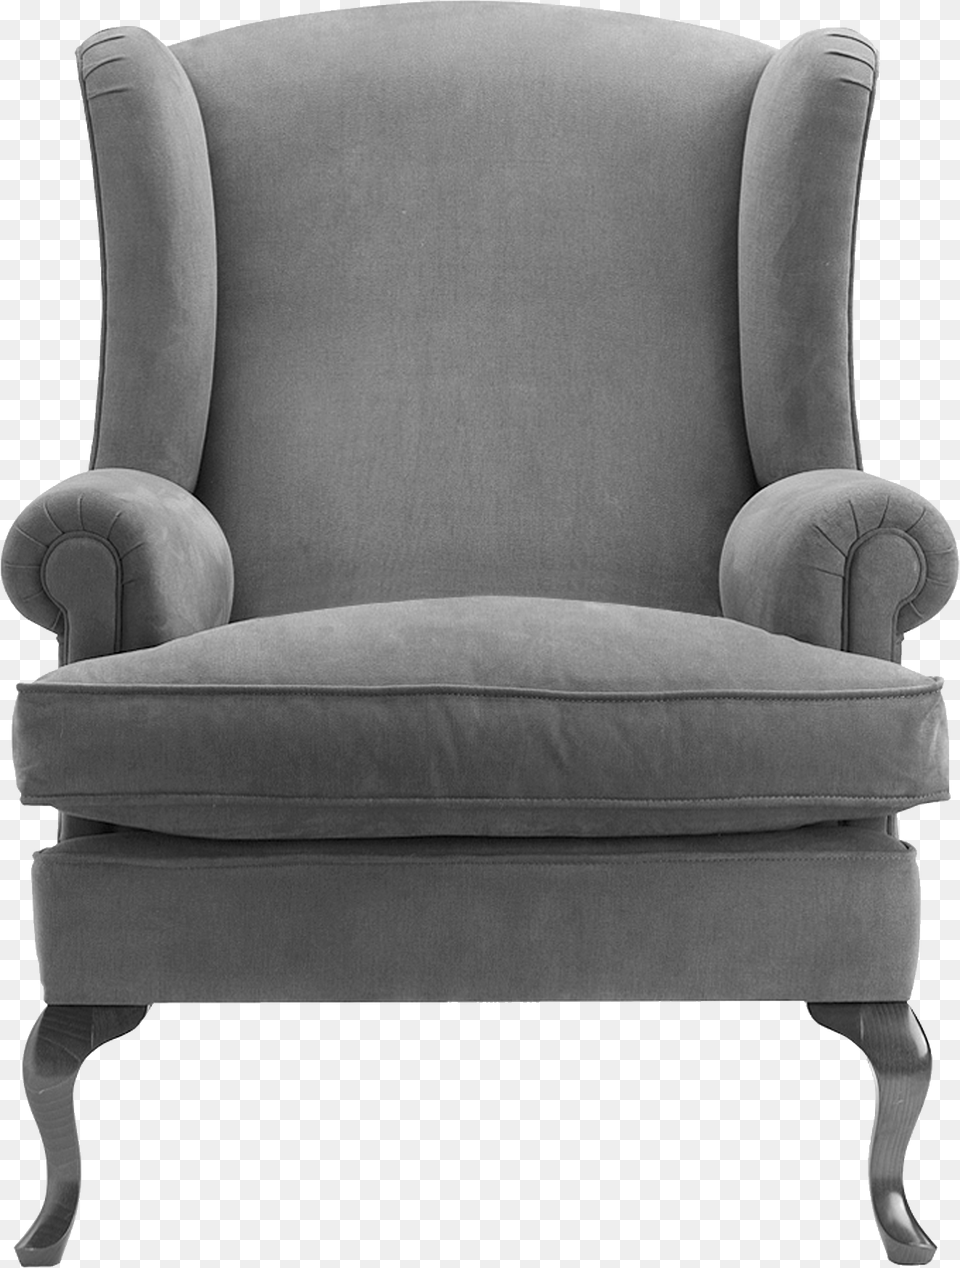 Download Armchair Image Armchair, Chair, Furniture Png